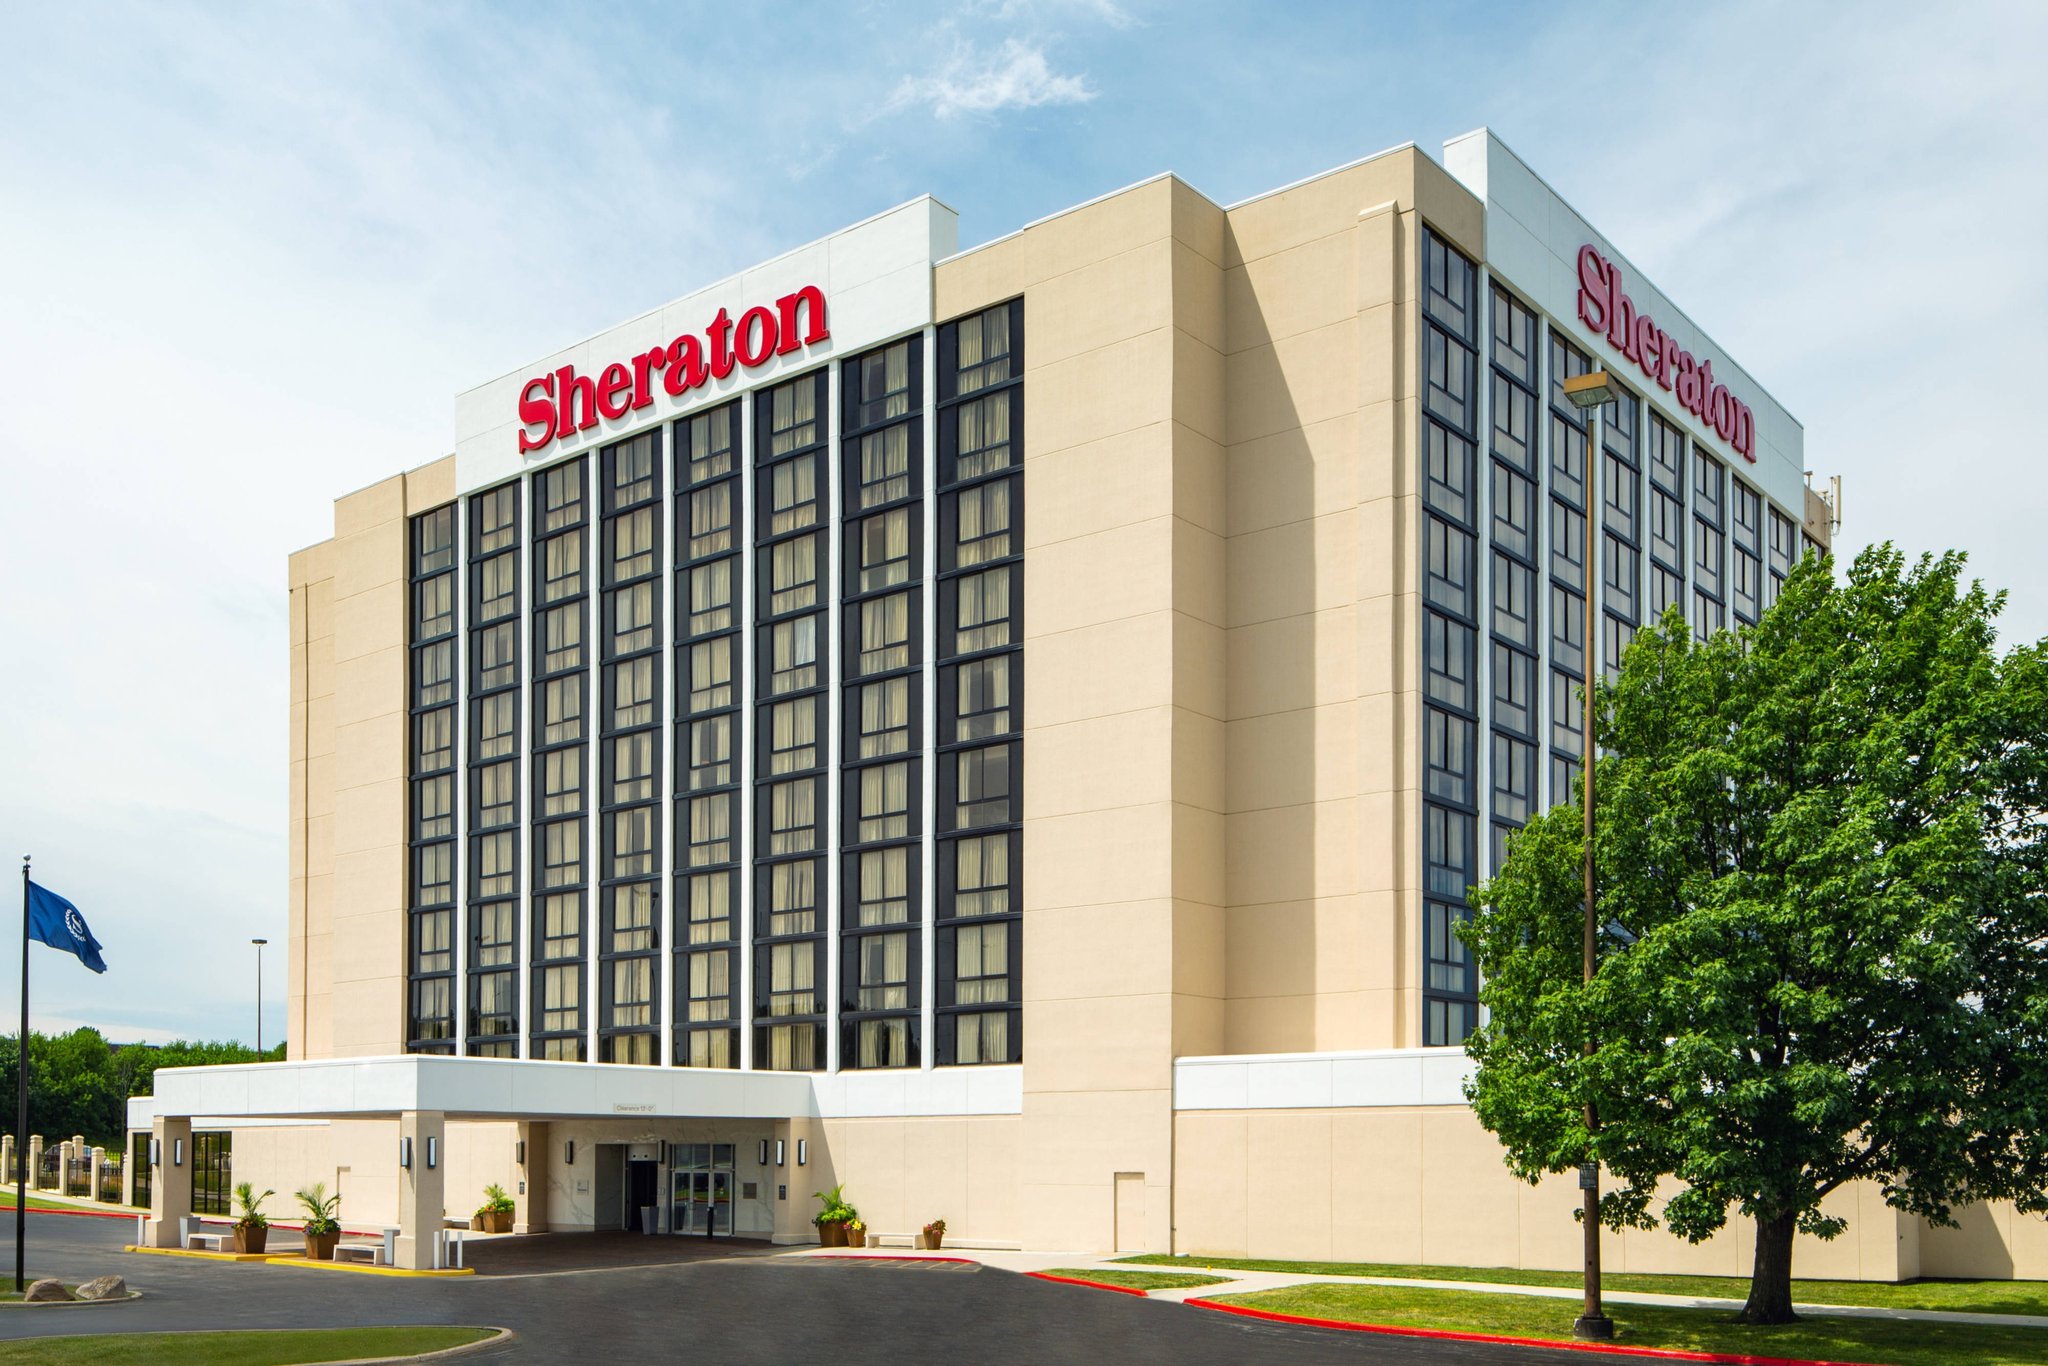 Sheraton West Des Moines Hotel First Class West Des Moines Ia